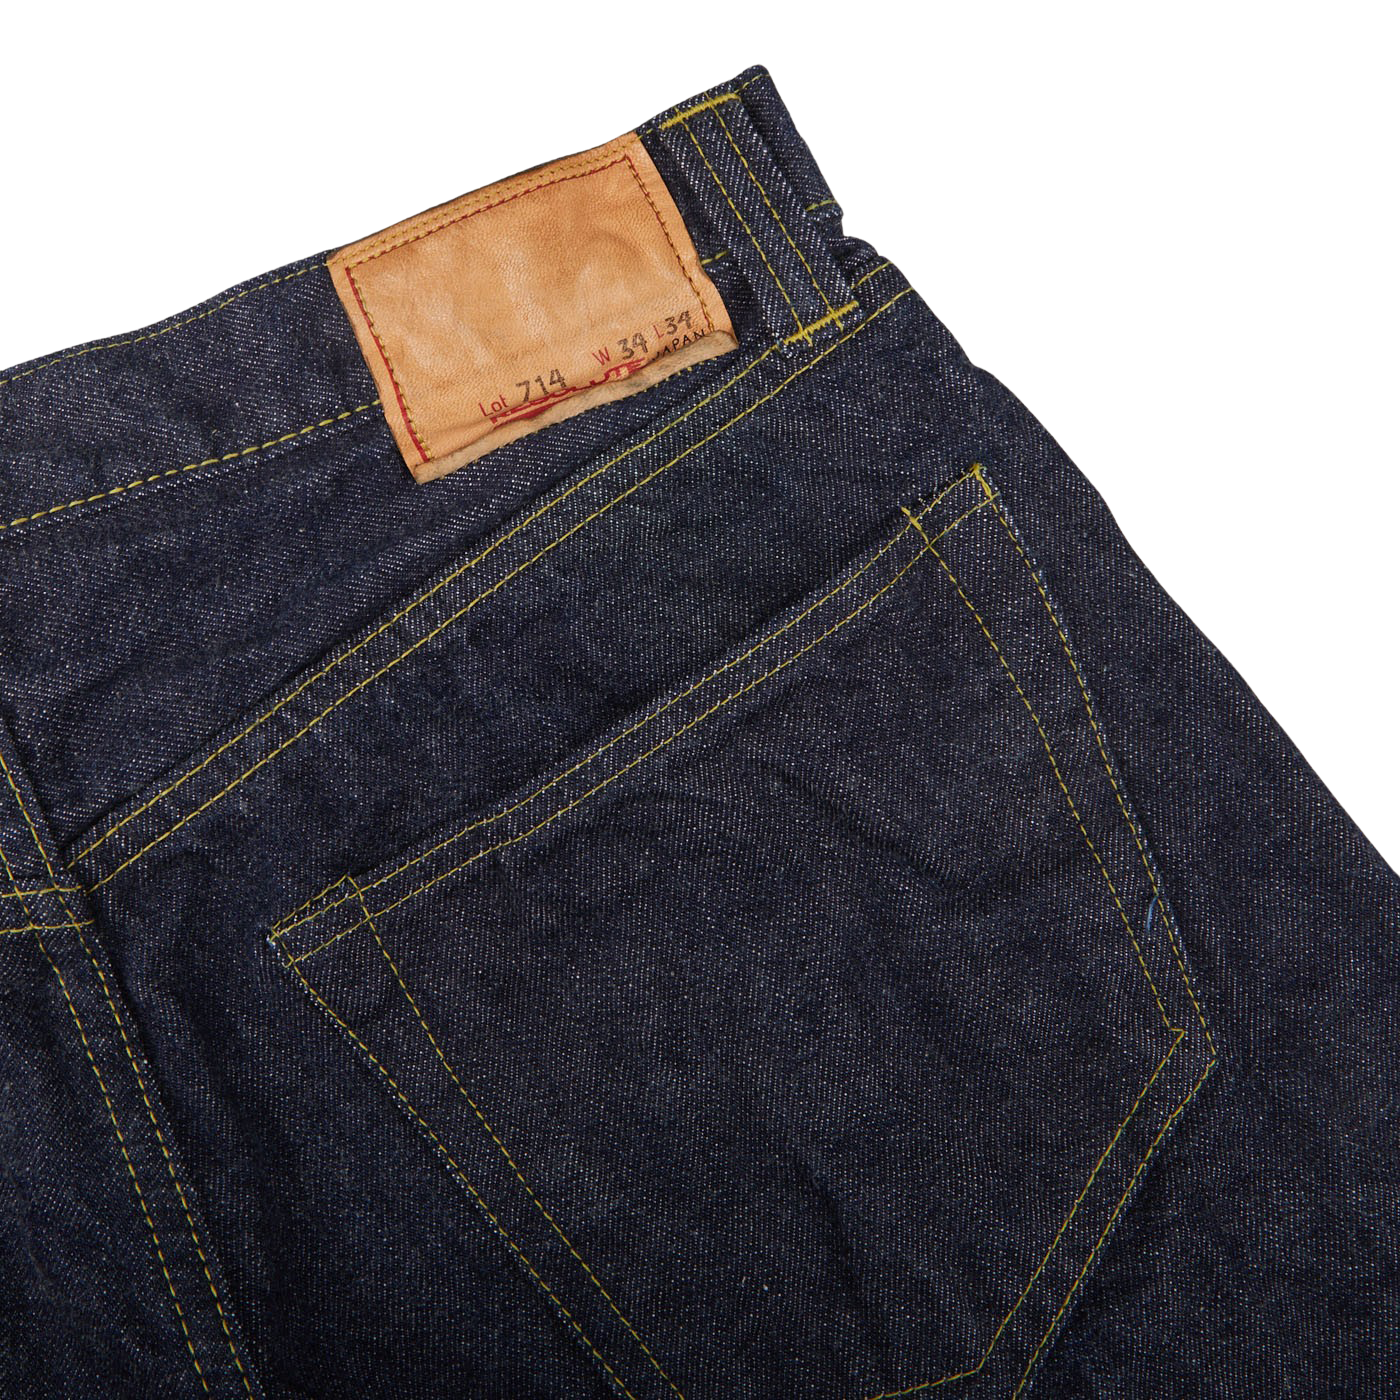 Close-up of the back pocket of Resolute's Dark Blue Cotton 714 One Wash Jeans featuring yellow stitching and a brown leather brand patch.